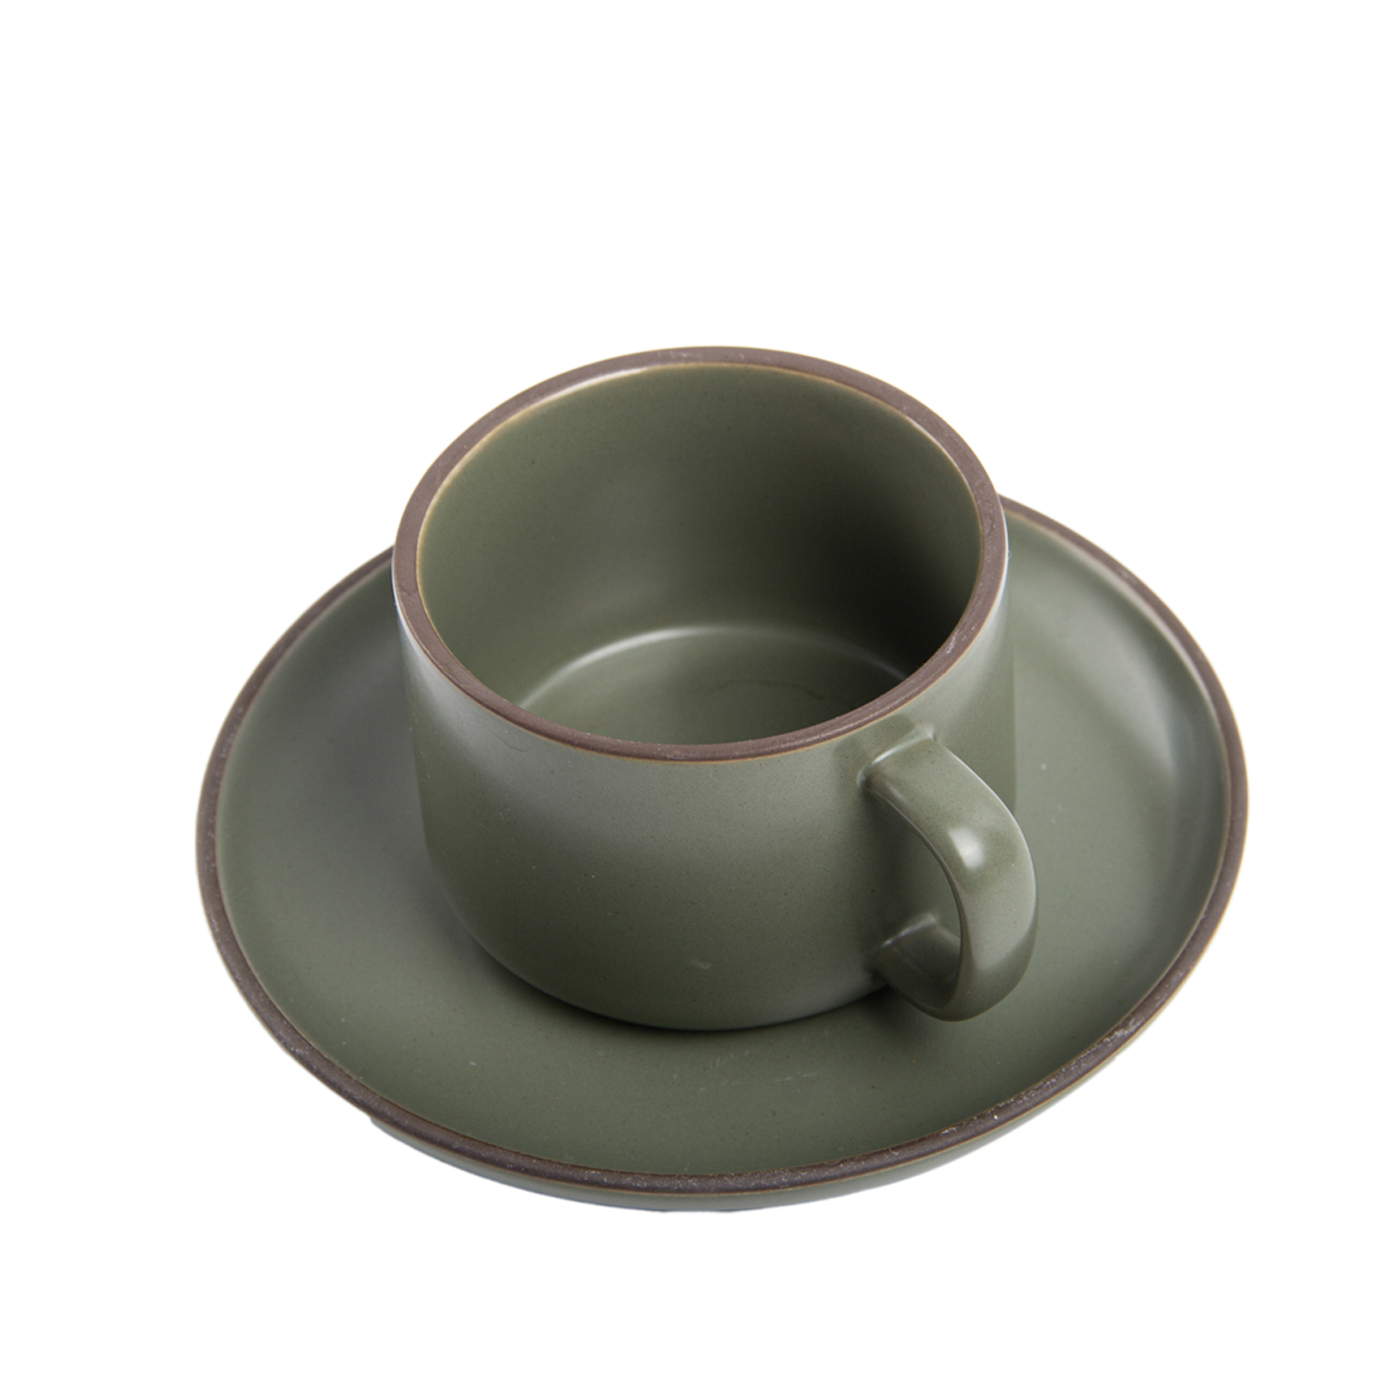 8 oz. Ceramic Coffee Cup With Saucer1